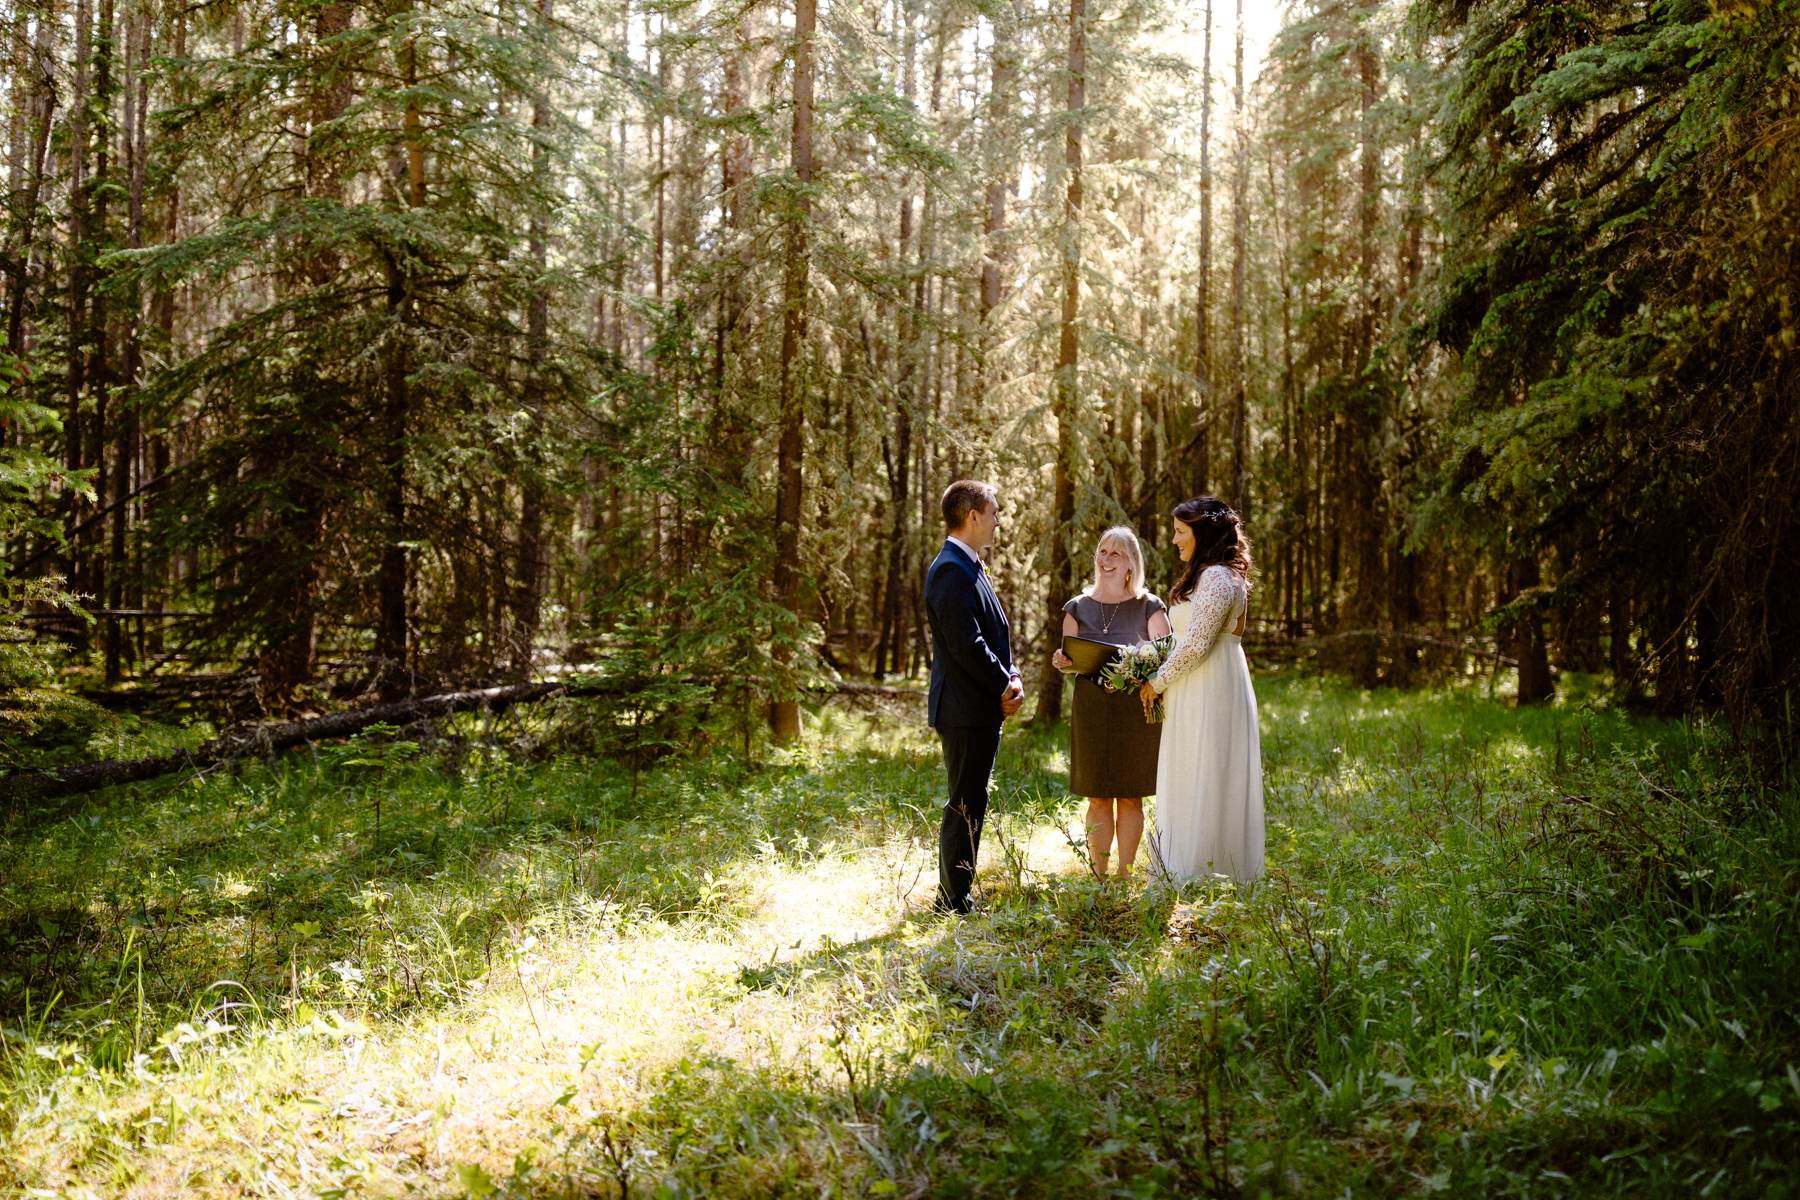 Vow Renewal Photography in Banff for their anniversary at Peyto Lake